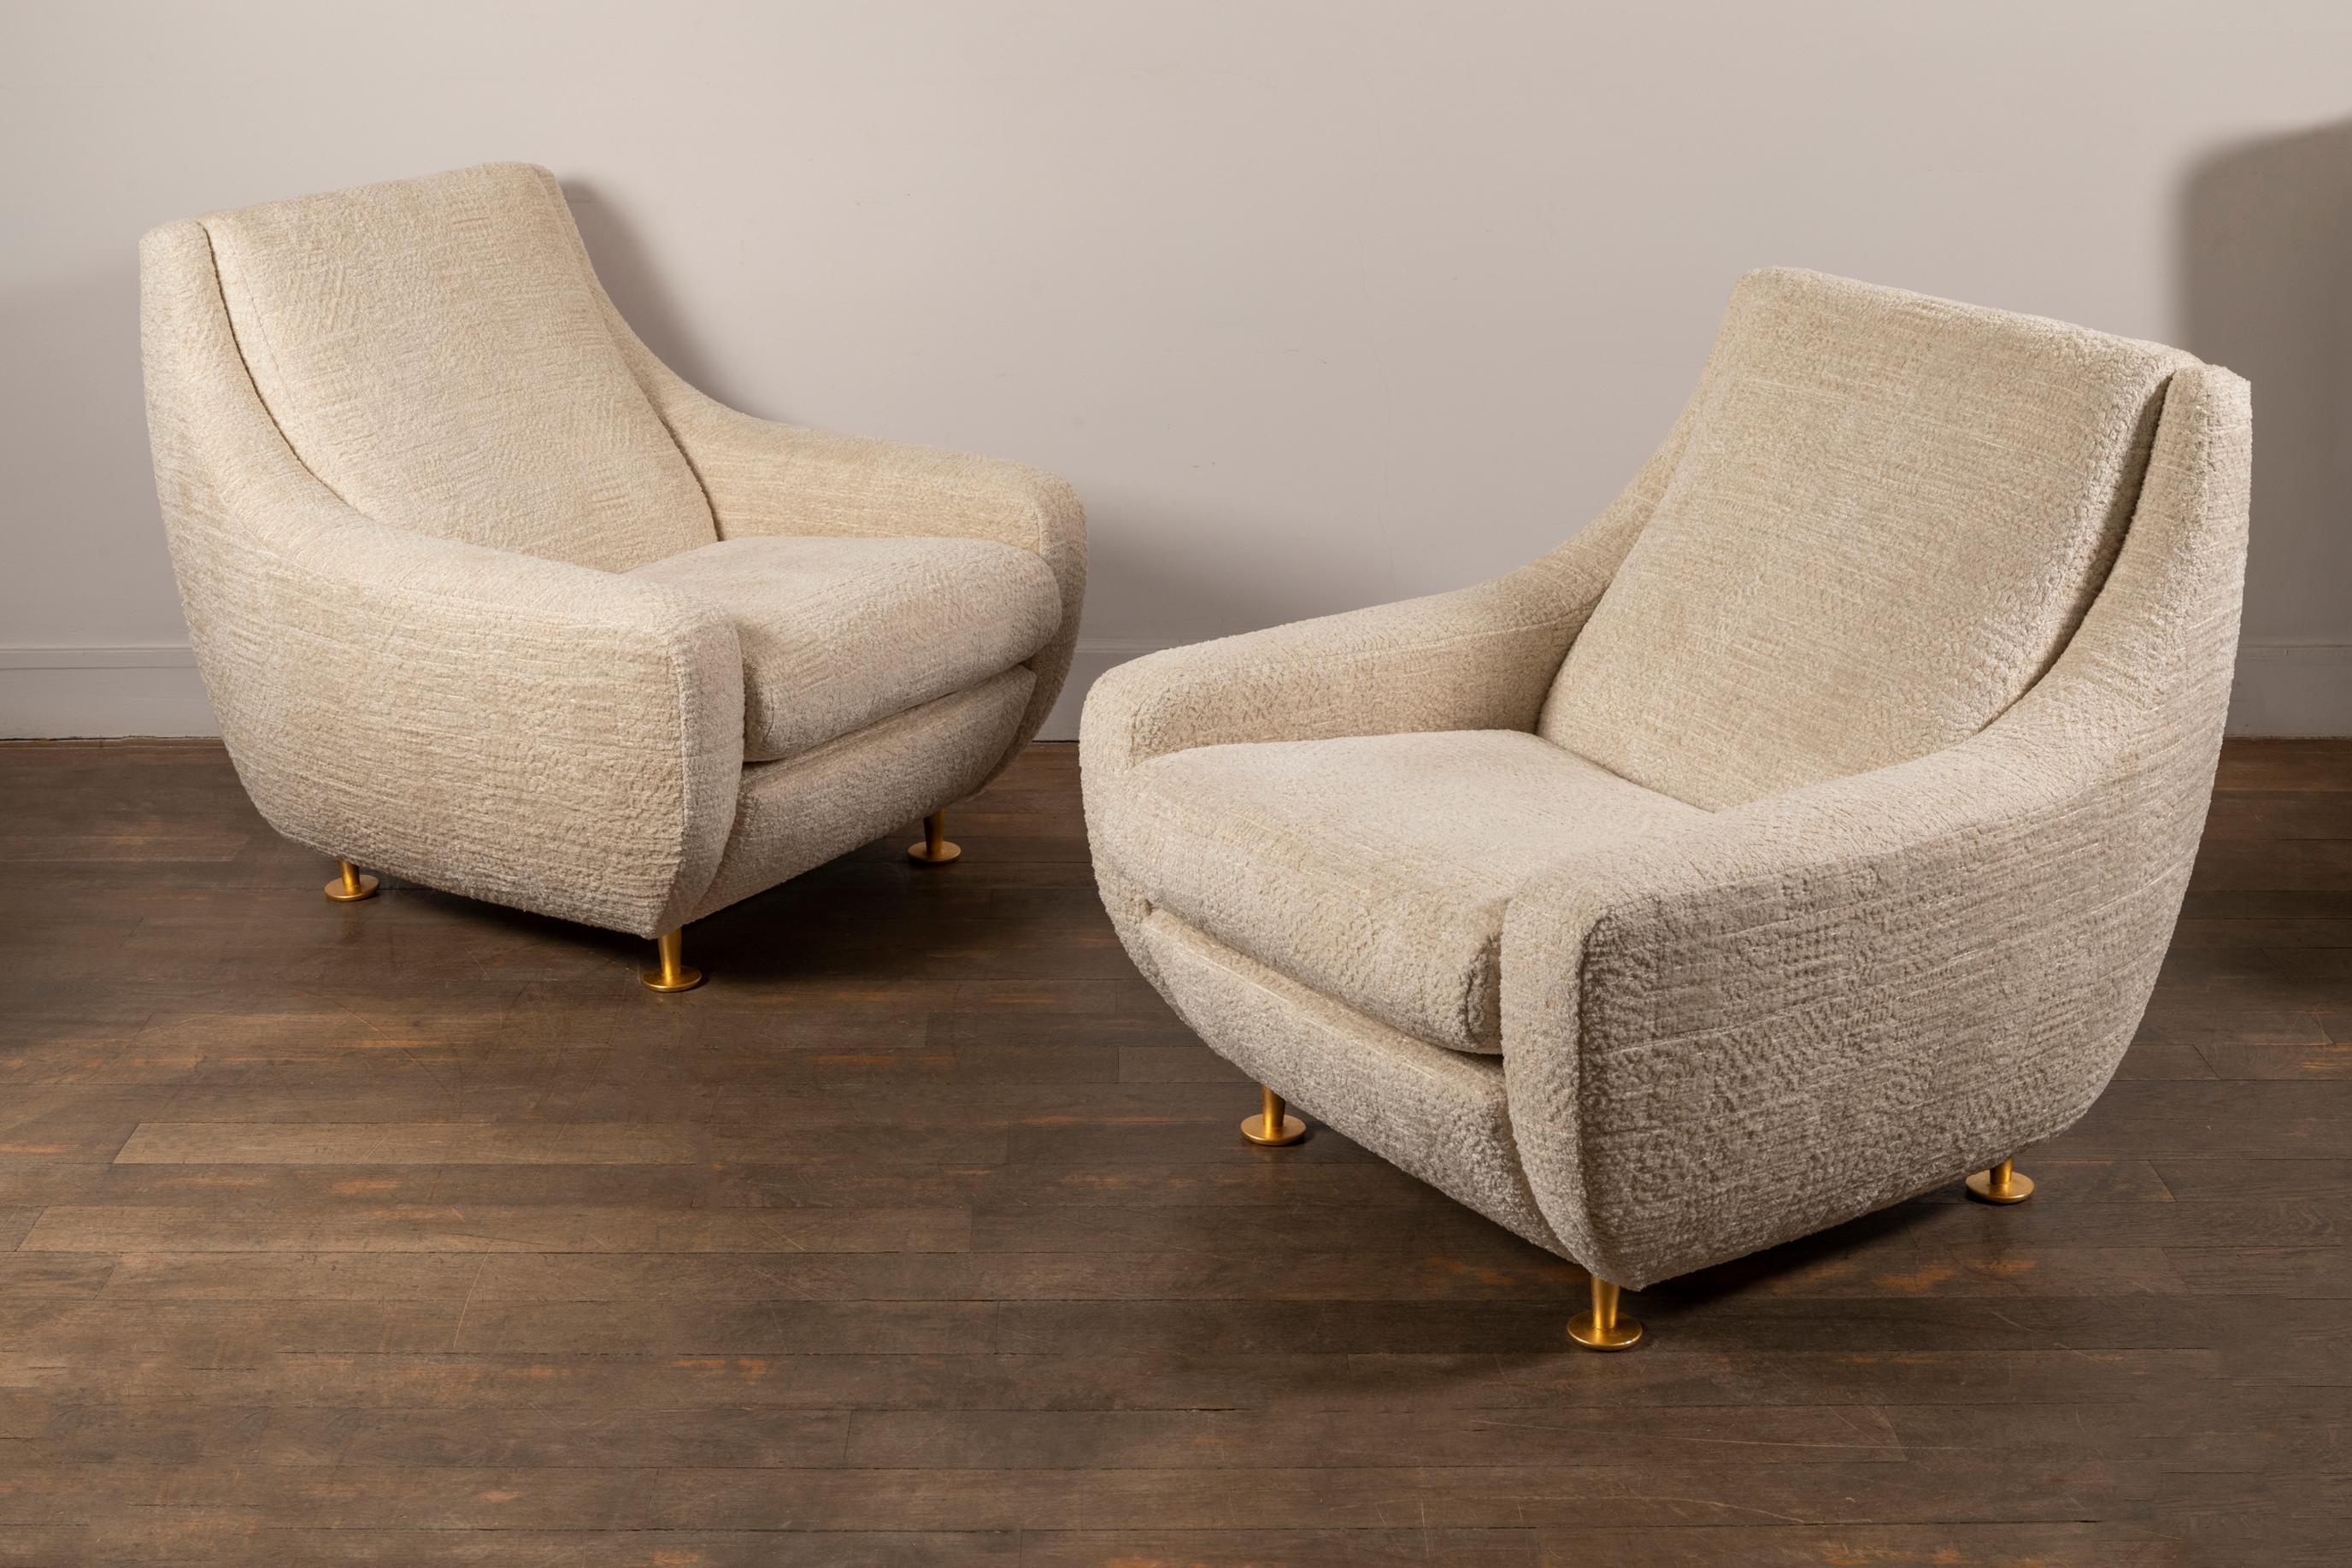 Pair of lounge chairs
In the style of Marco Zanuso
gilded metal feet . 
Italy, 1950s

Newly re-upholstered in Nobilis fabric
Measures: Height 82 cm, 32.3 in.
Width 87 cm, 43.2 in.
Depth 92 cm, 36.2 in.
Height seat 44 cm, 17.3 in.

 